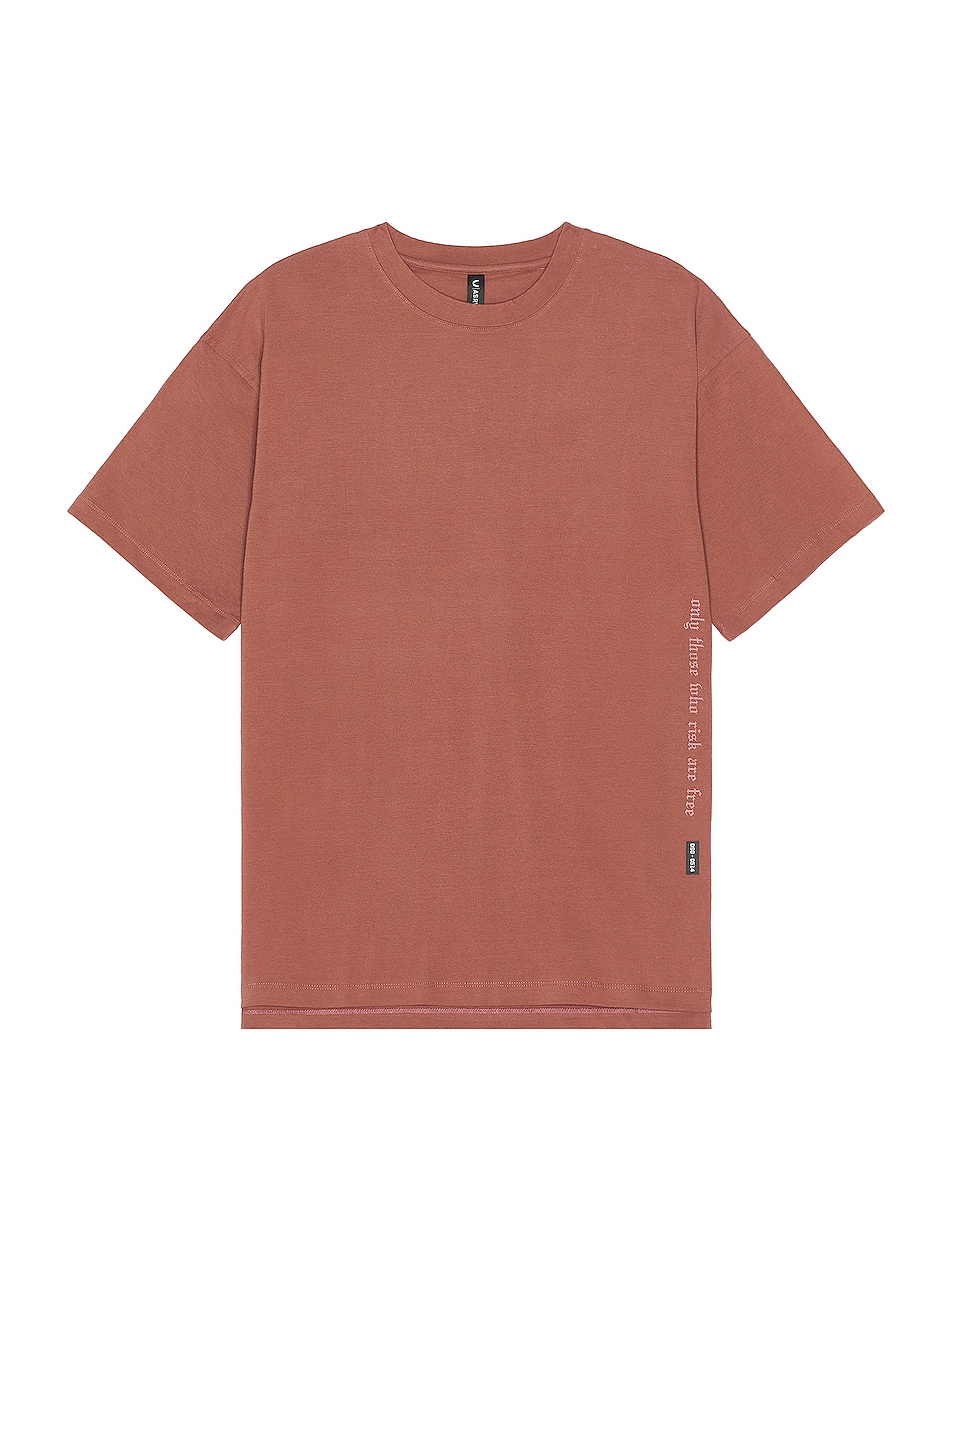 Image 1 of ASRV Cotton Plus Oversized Tee in Red Earth